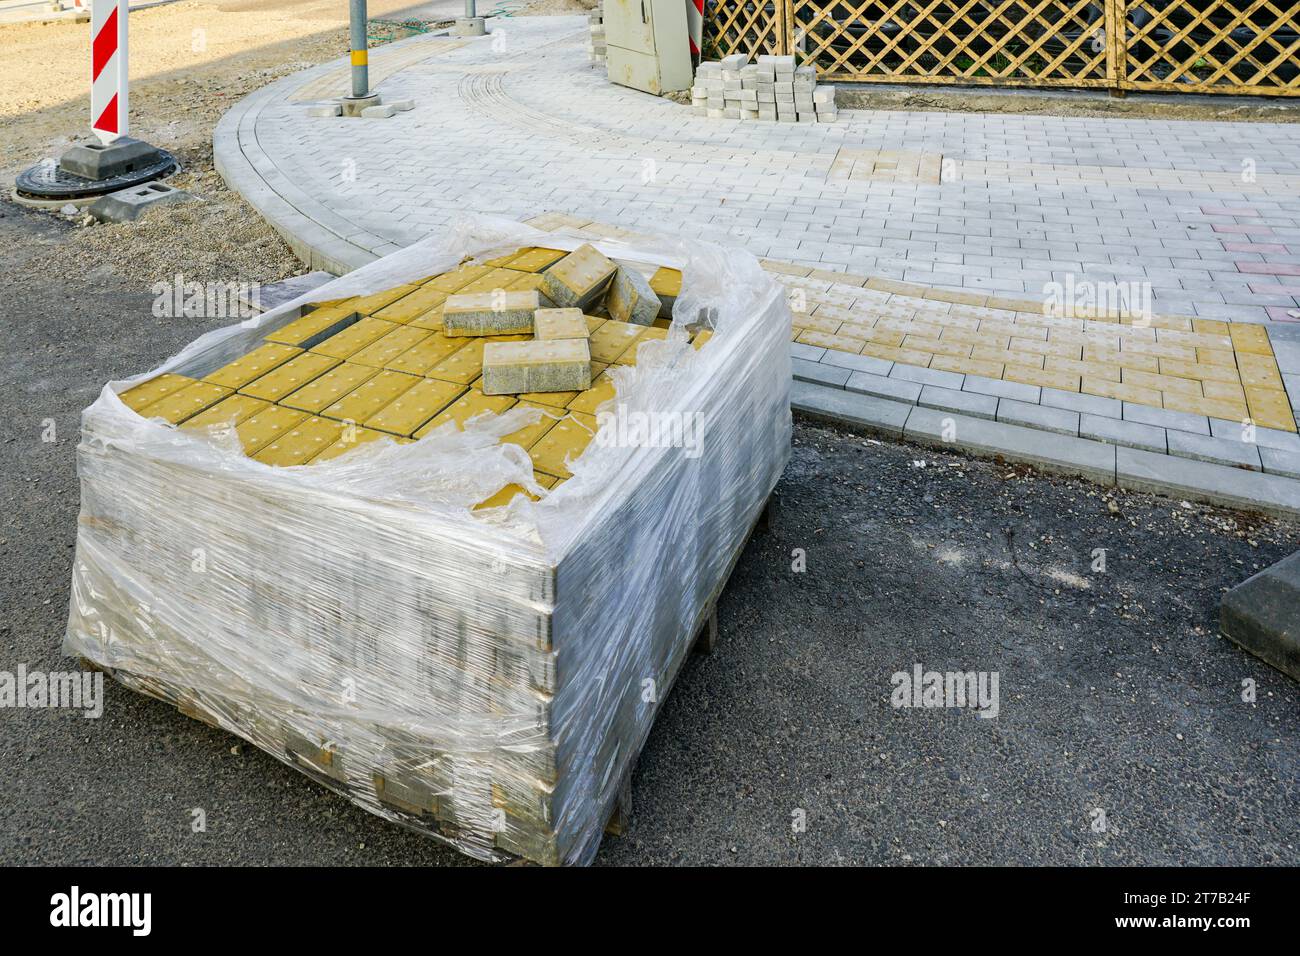 Street reconstruction view, pallet with yellow tactile paving stones for blind in foreground Stock Photo